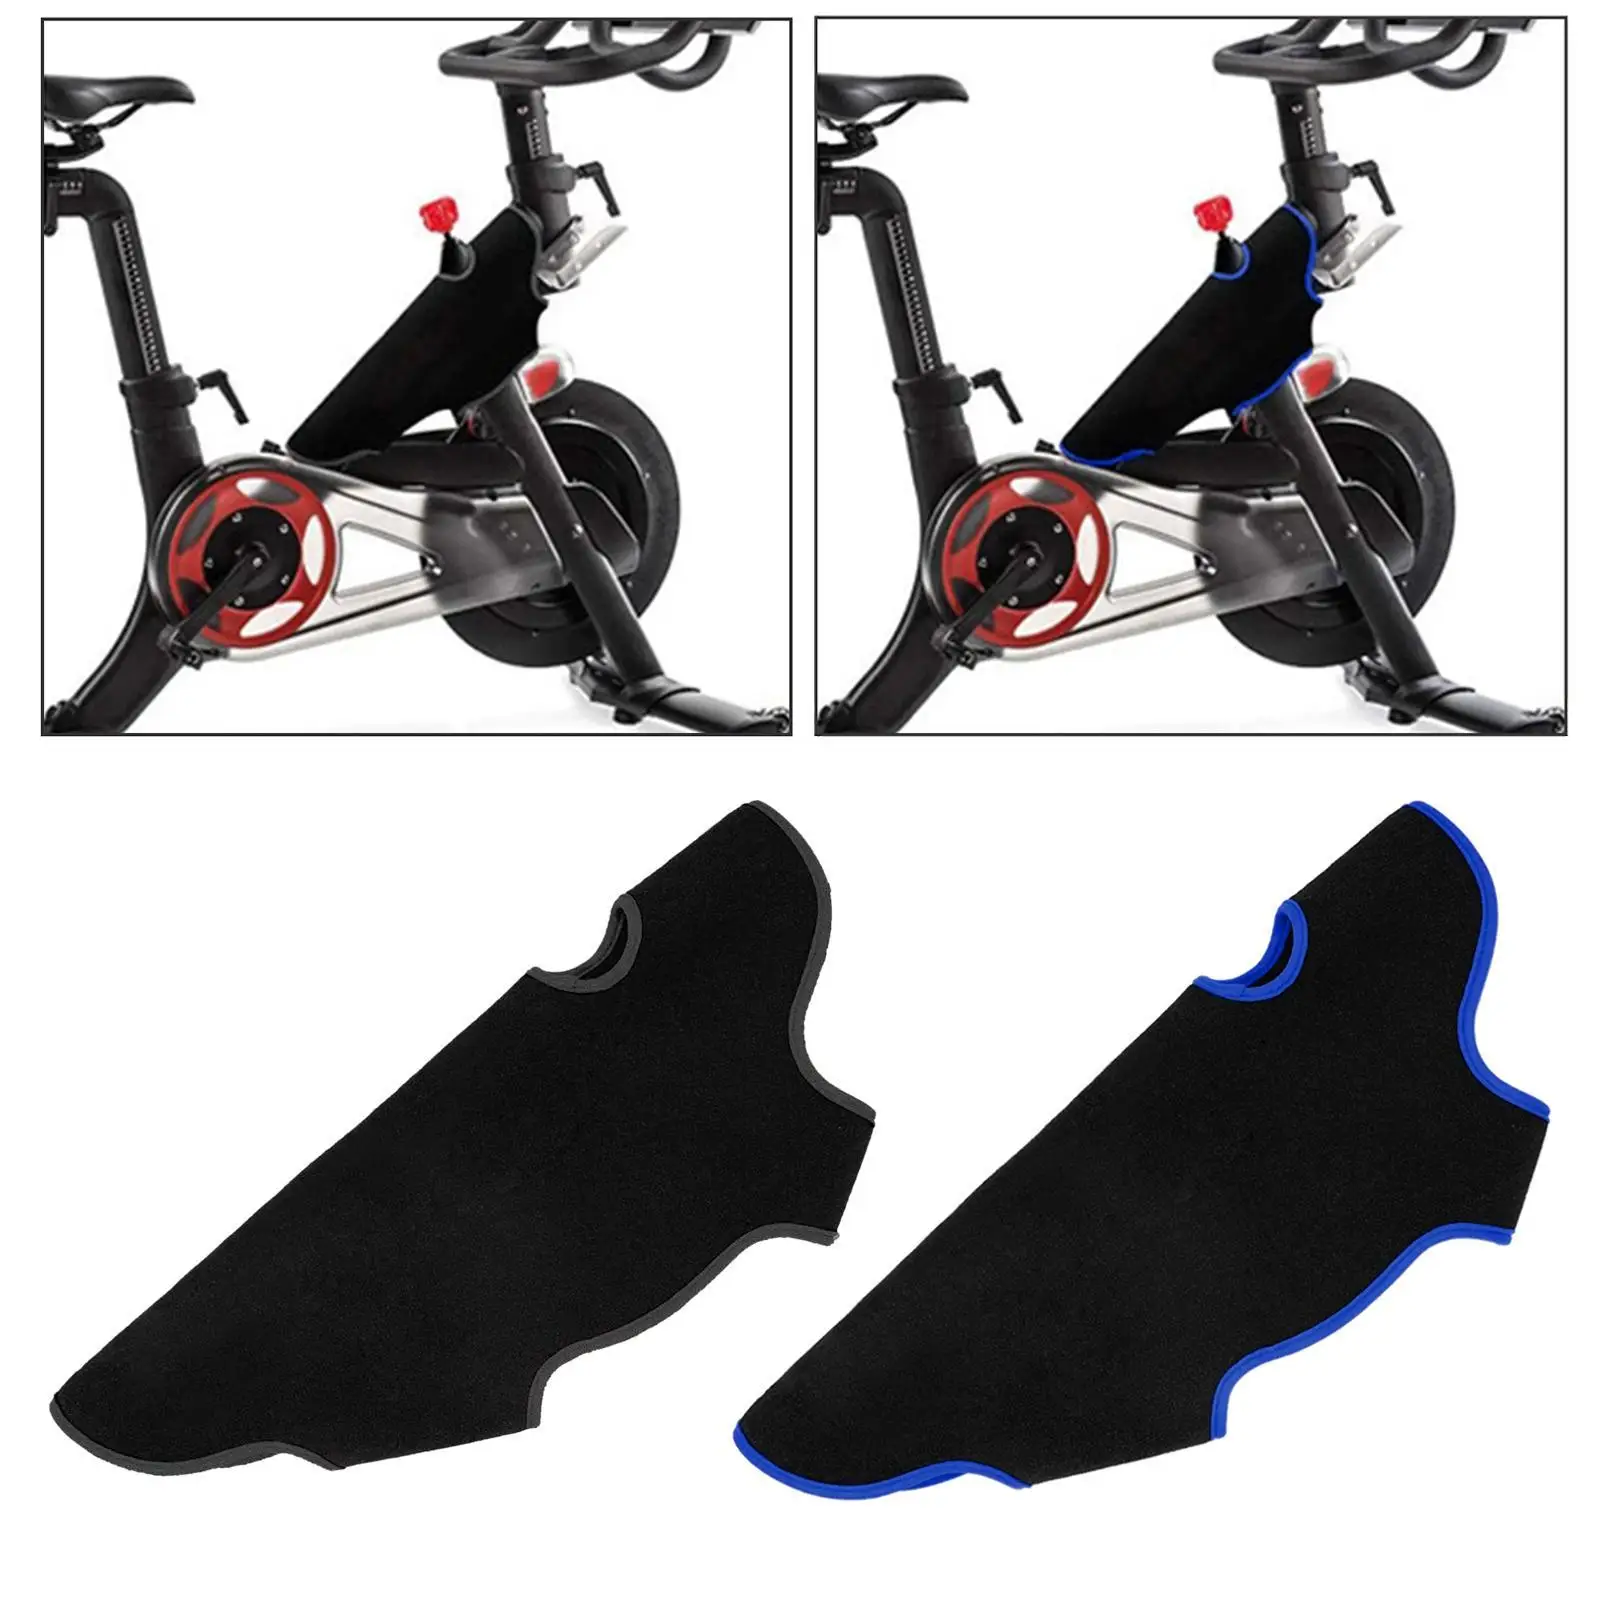 1x Frame Wrap for  Bike Cycling Cover Absorbent Dustproof